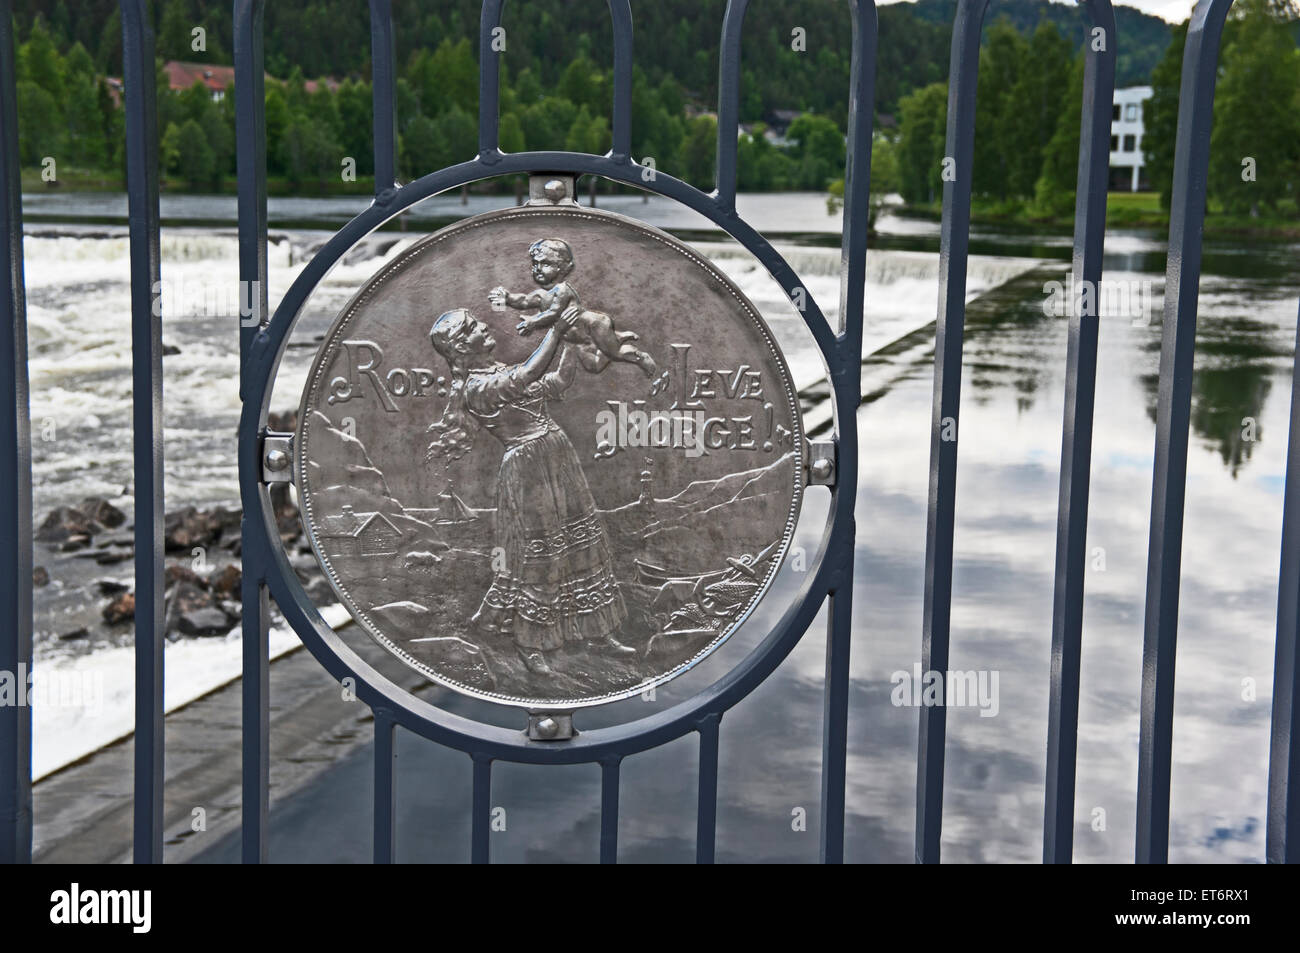 Replica Mint Coin, From Royal Mint Silver Mine, On Bridge over River, Kongsberg, Buskerud, Norway, Stock Photo